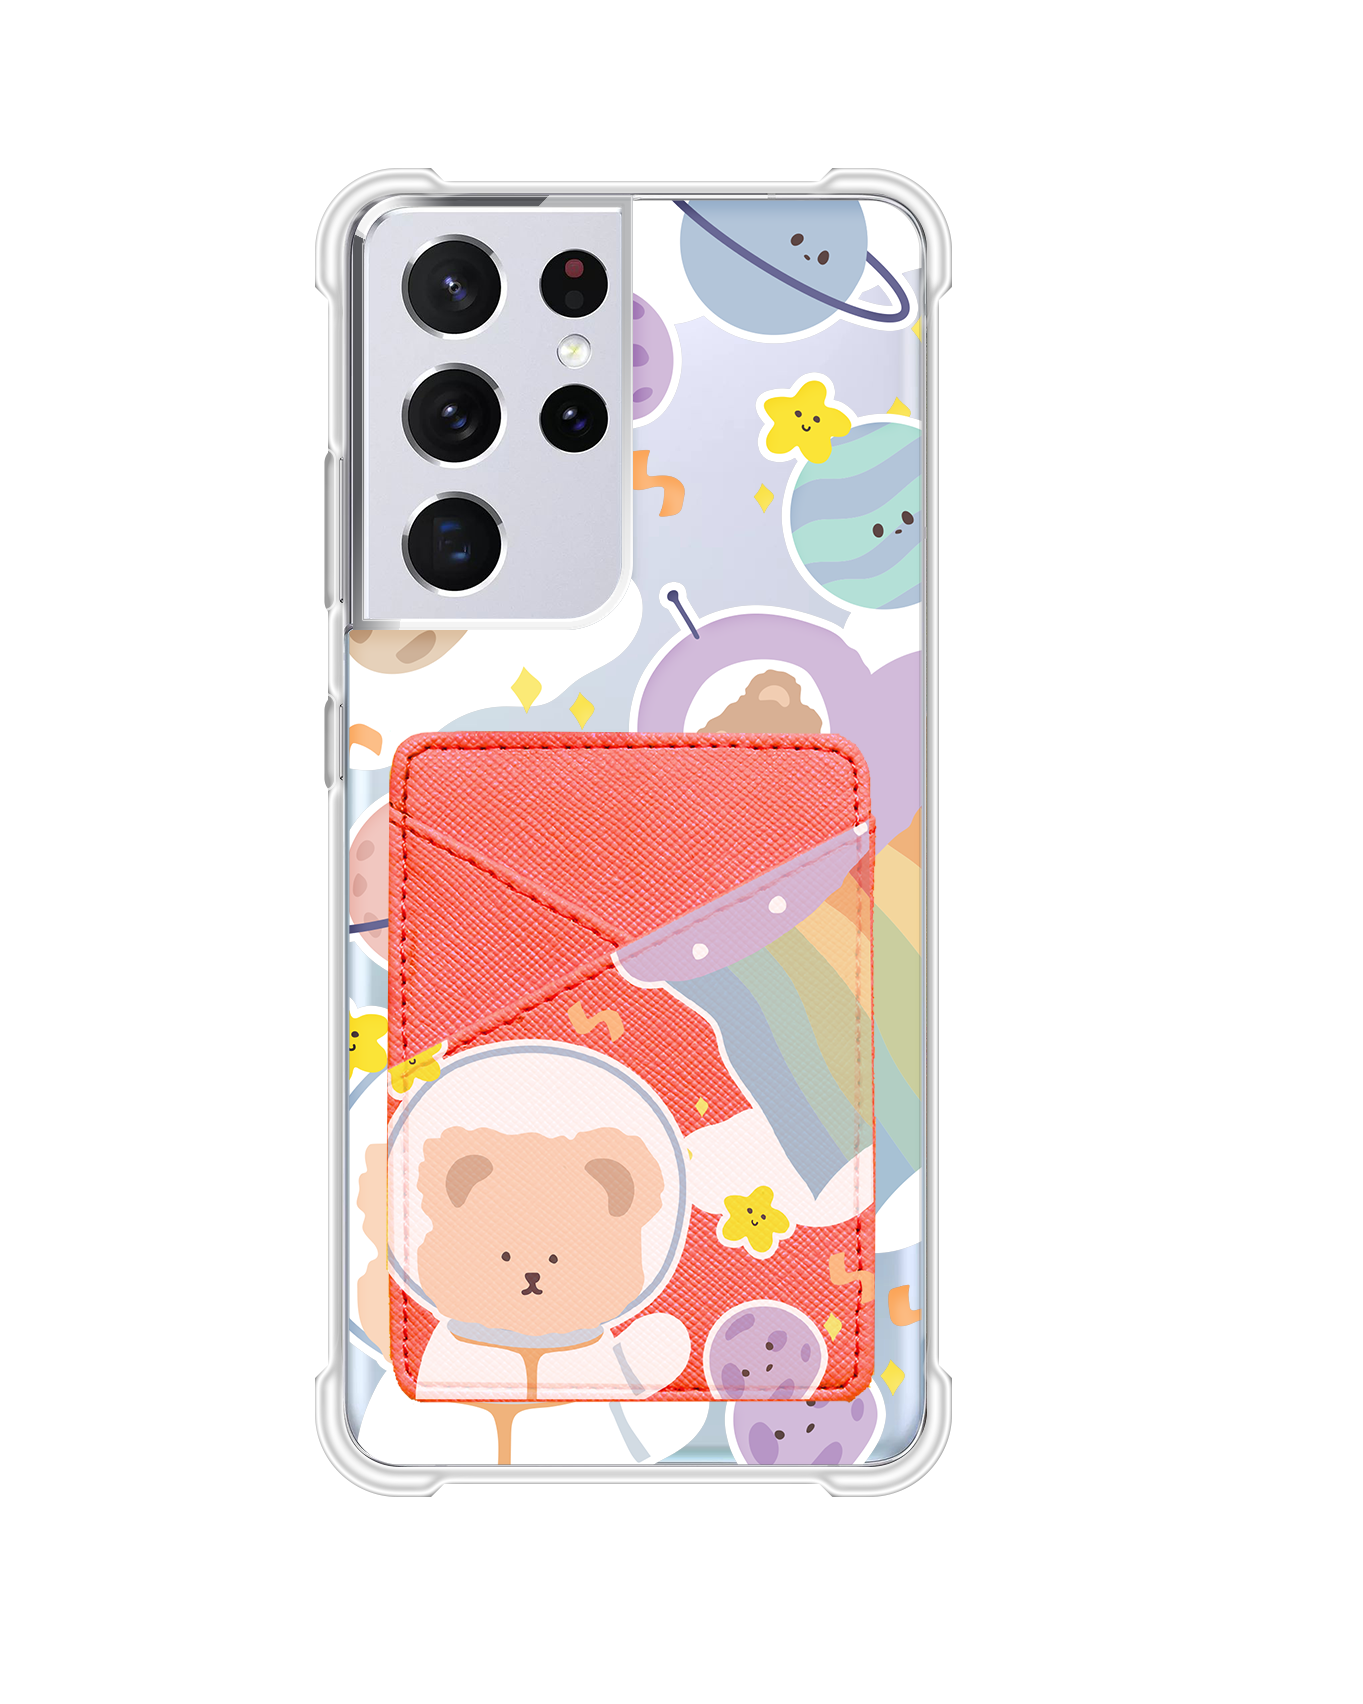 Android Phone Wallet Case - Astro Bear